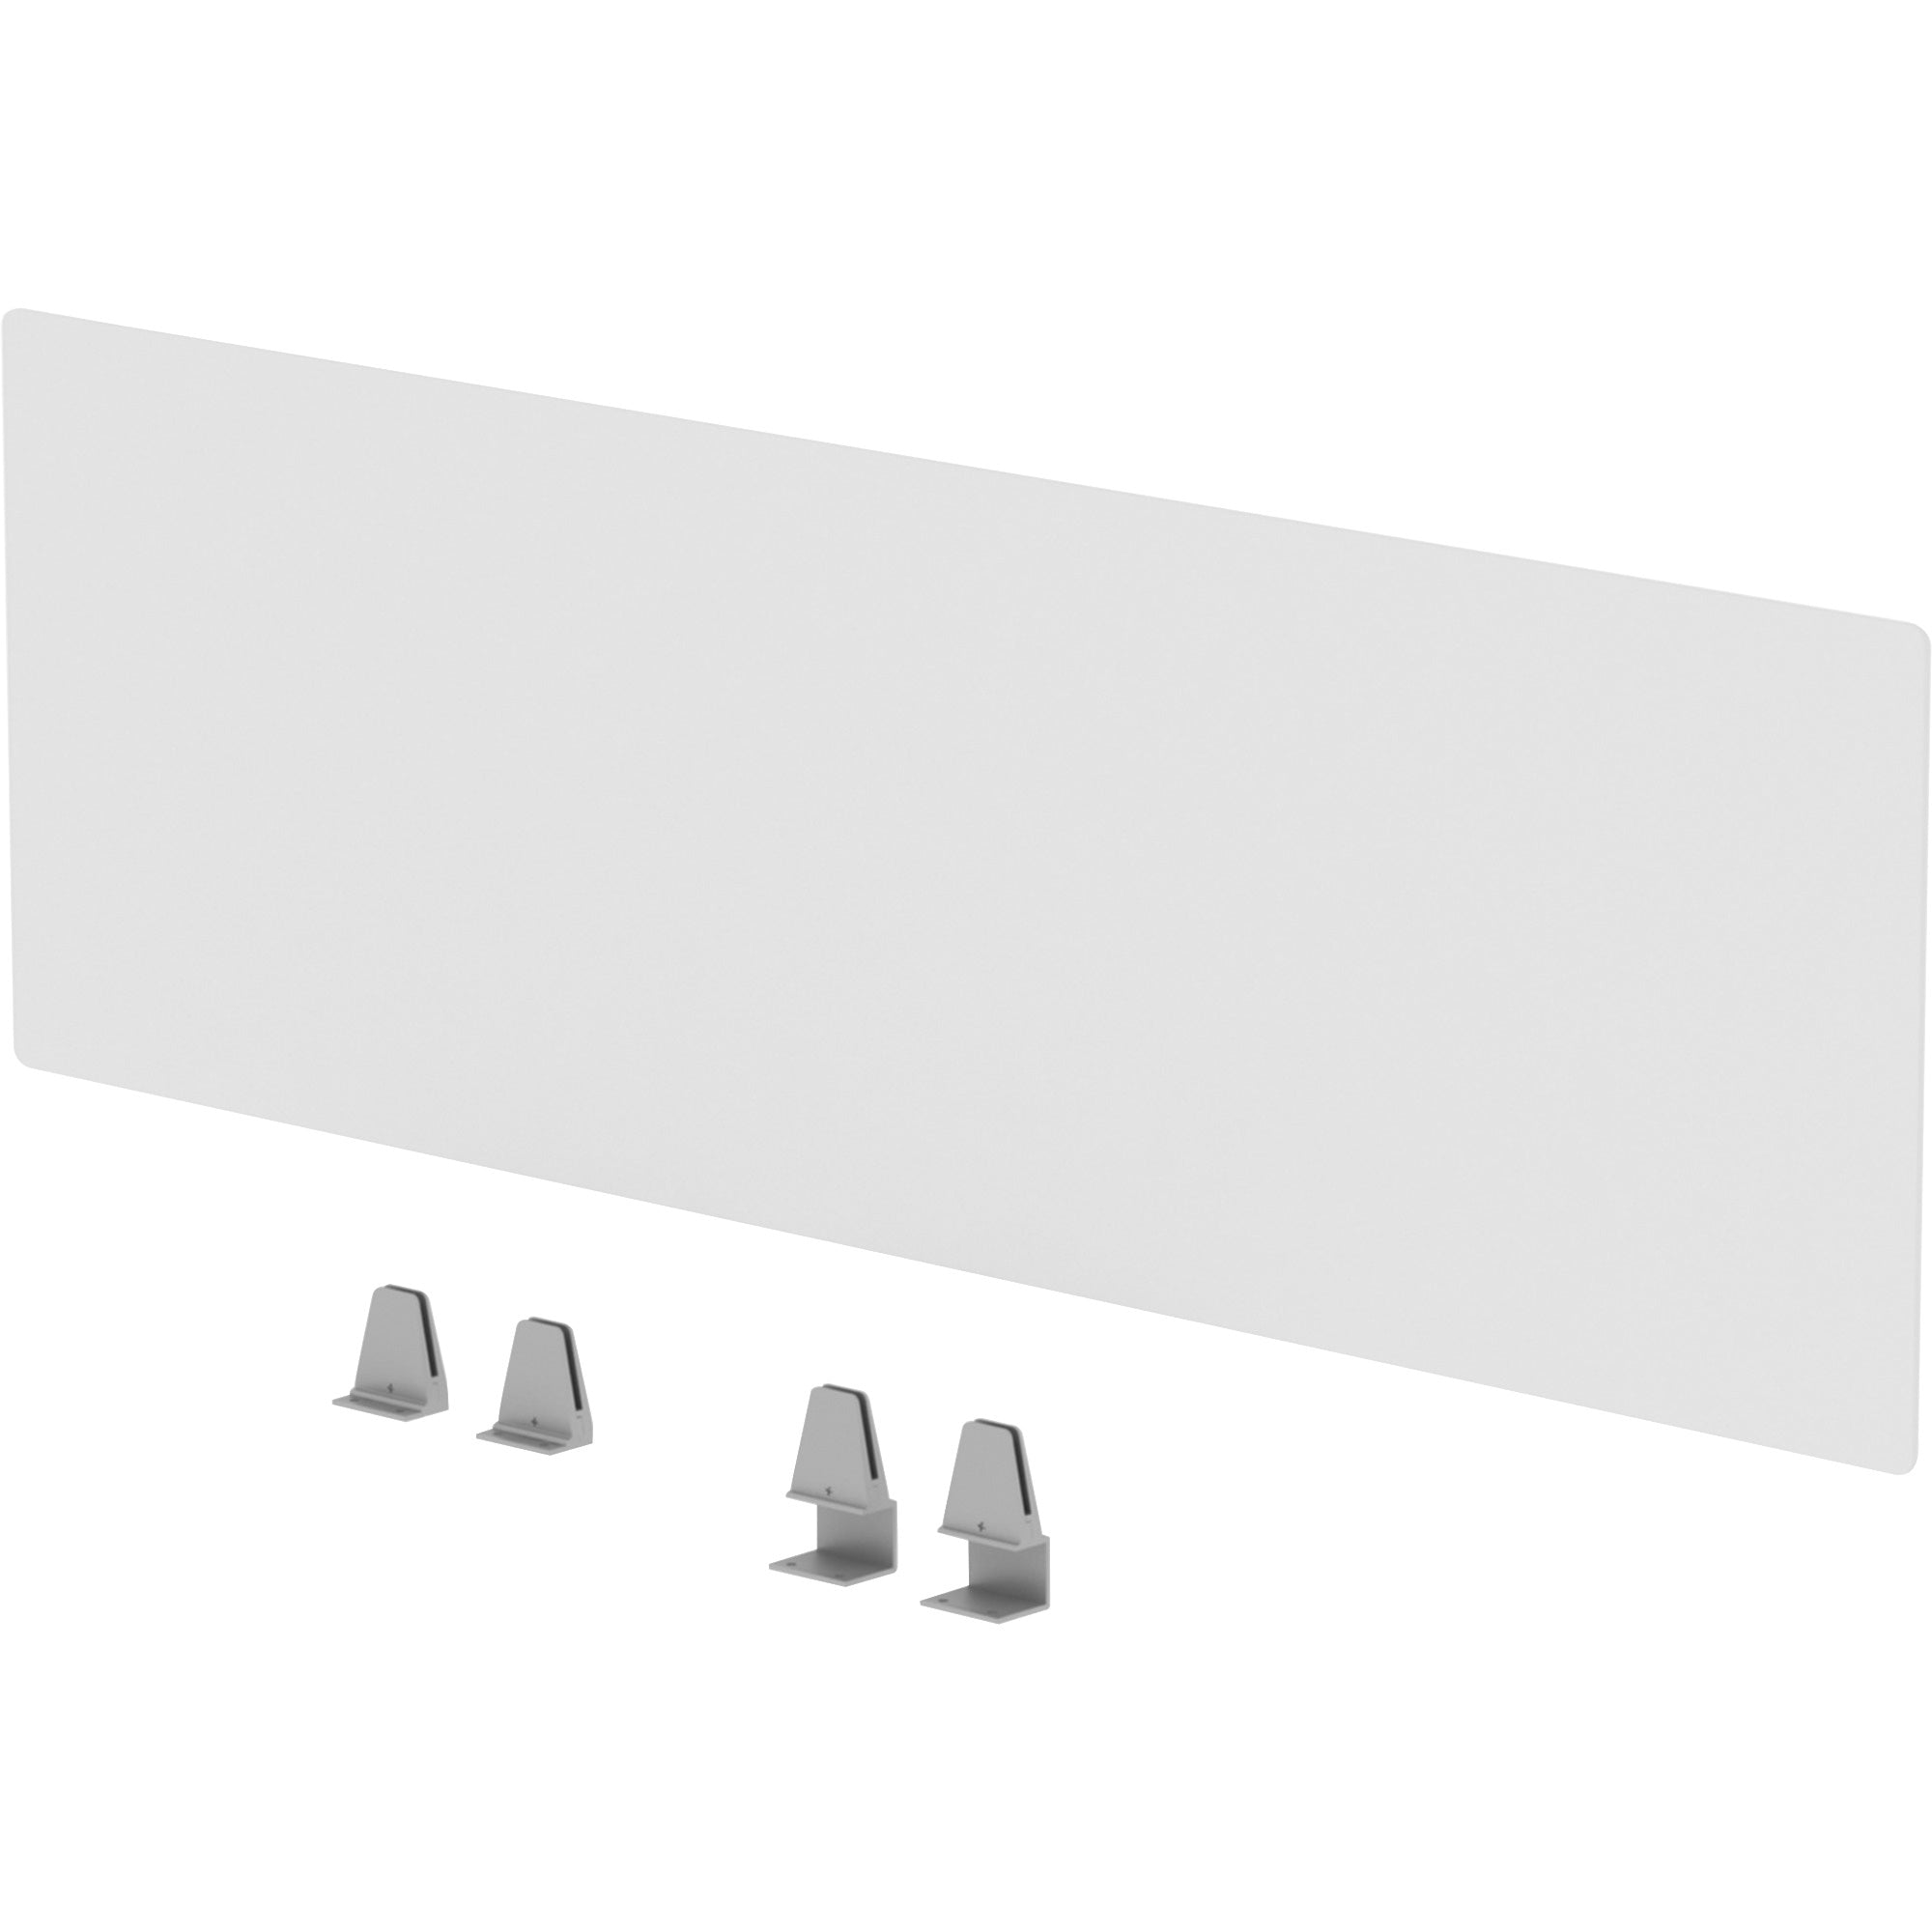 lorell-relevance-series-modesty-privacy-panel-493-width-x-158-height-clear-1-each_llr16220 - 3